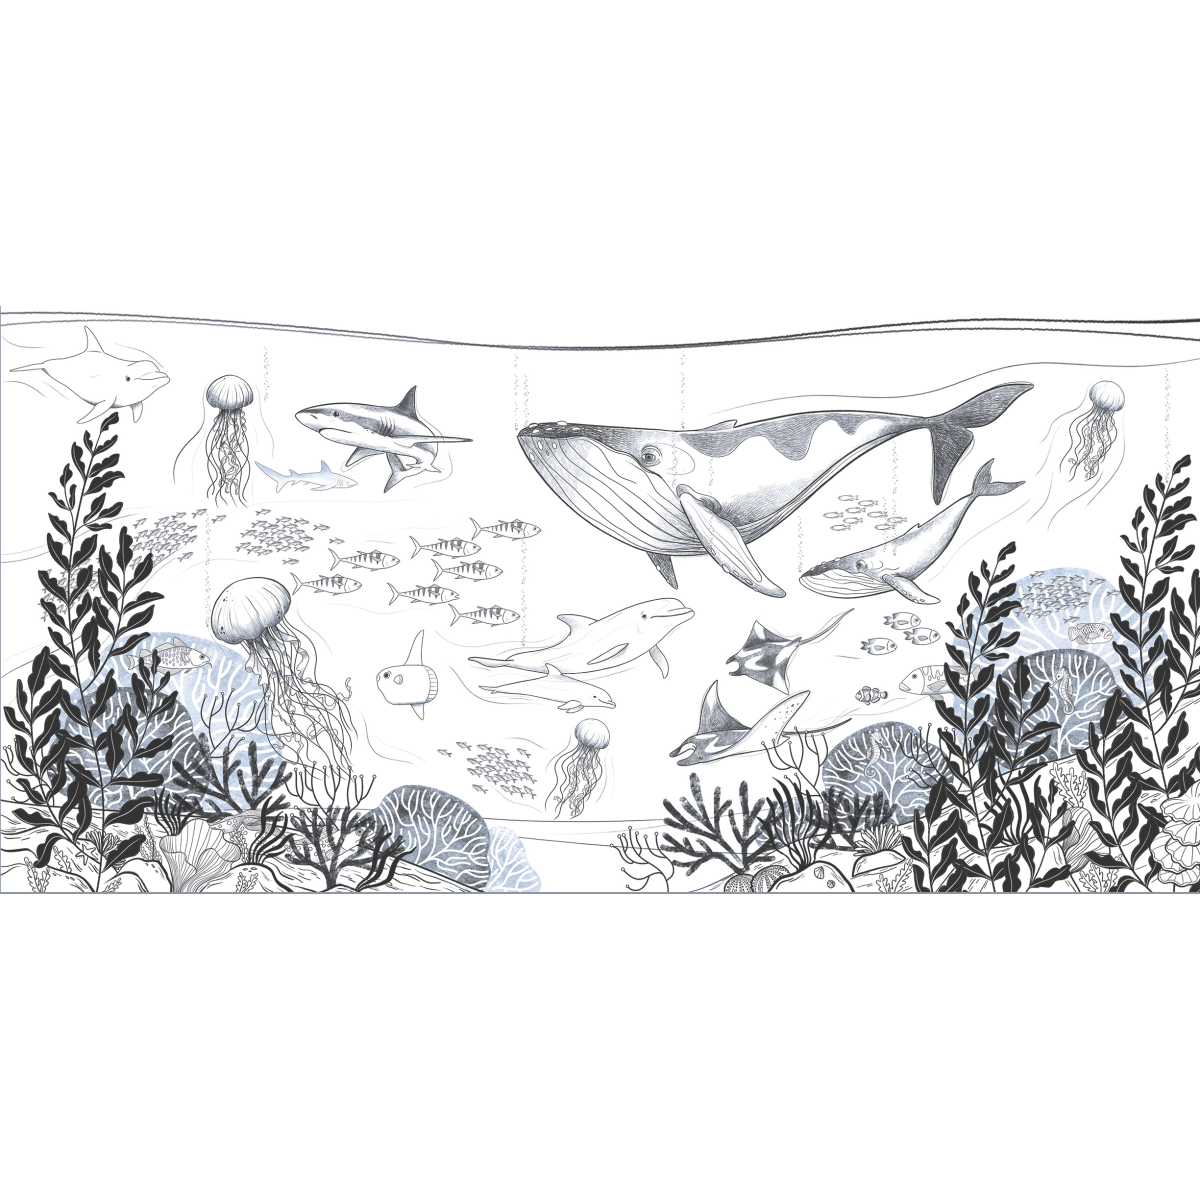 Panoramic Ocean wallpaper by Emmanuelle Colin for children's rooms